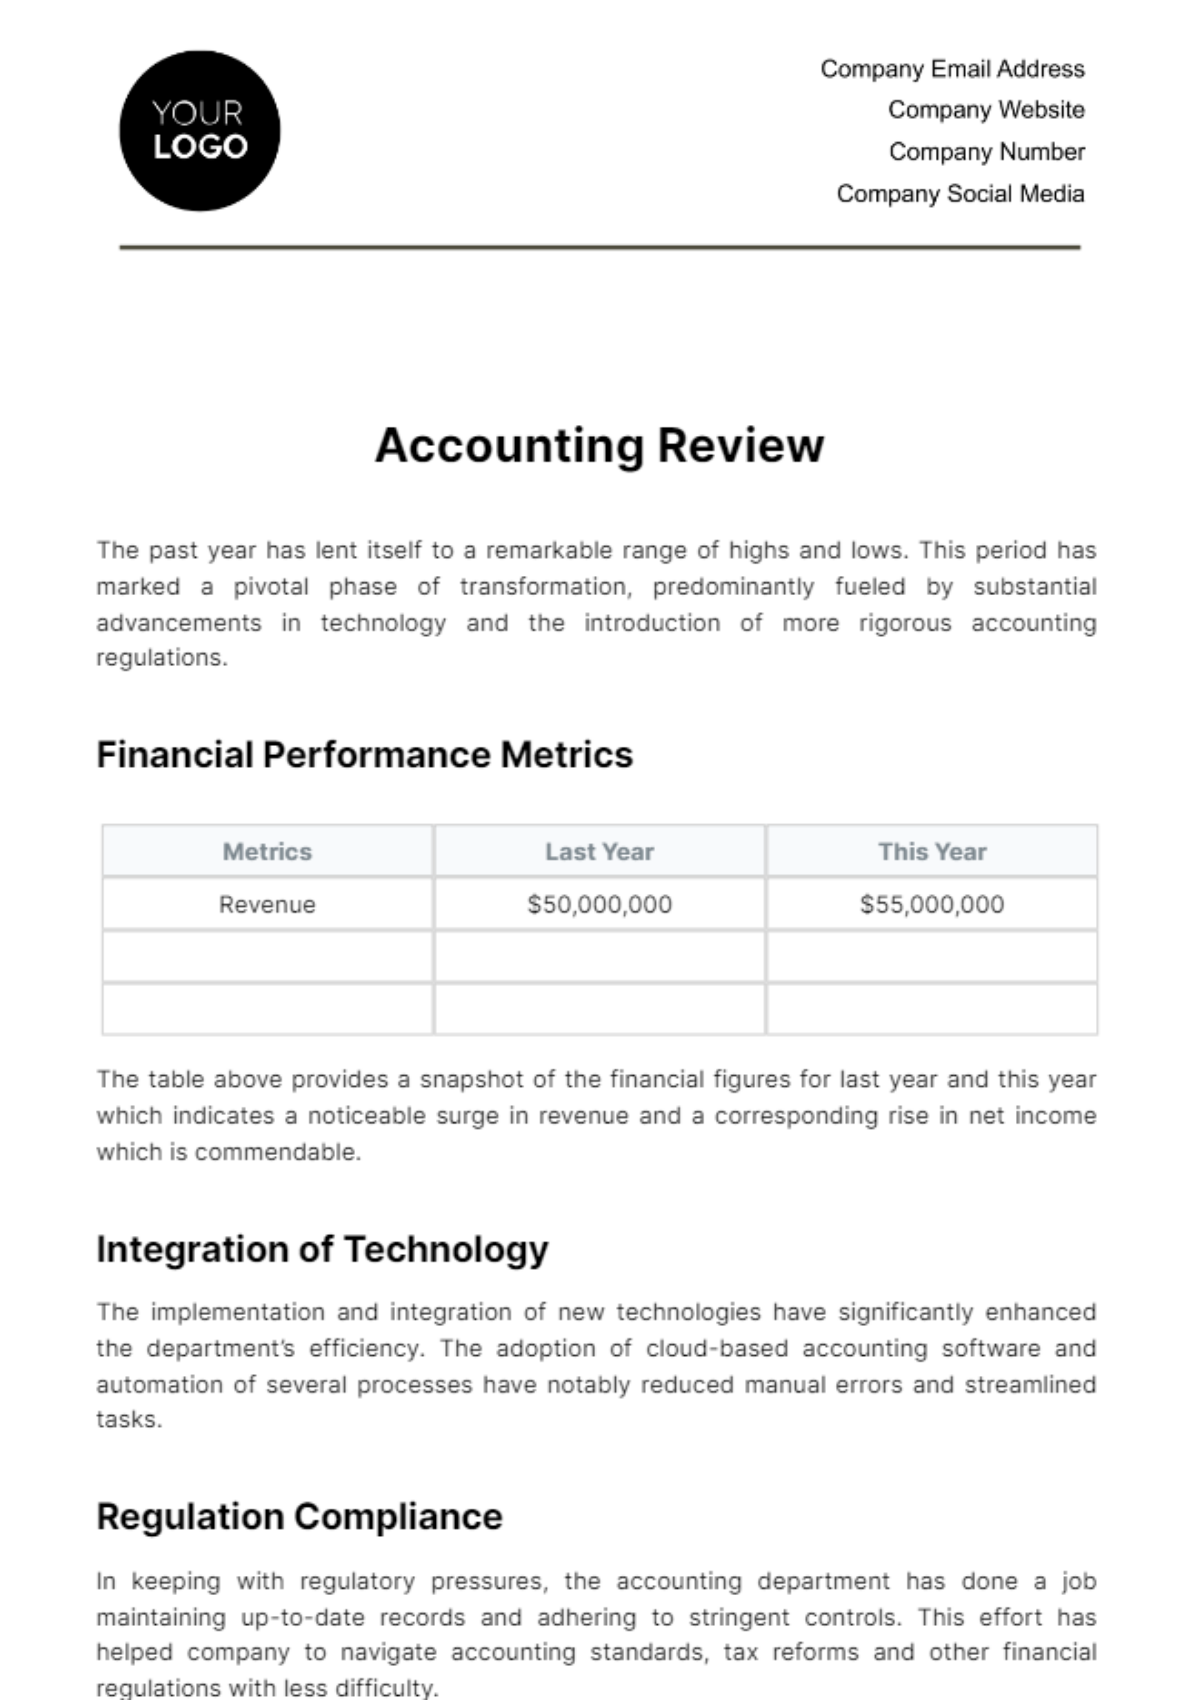 Accounting Review Template